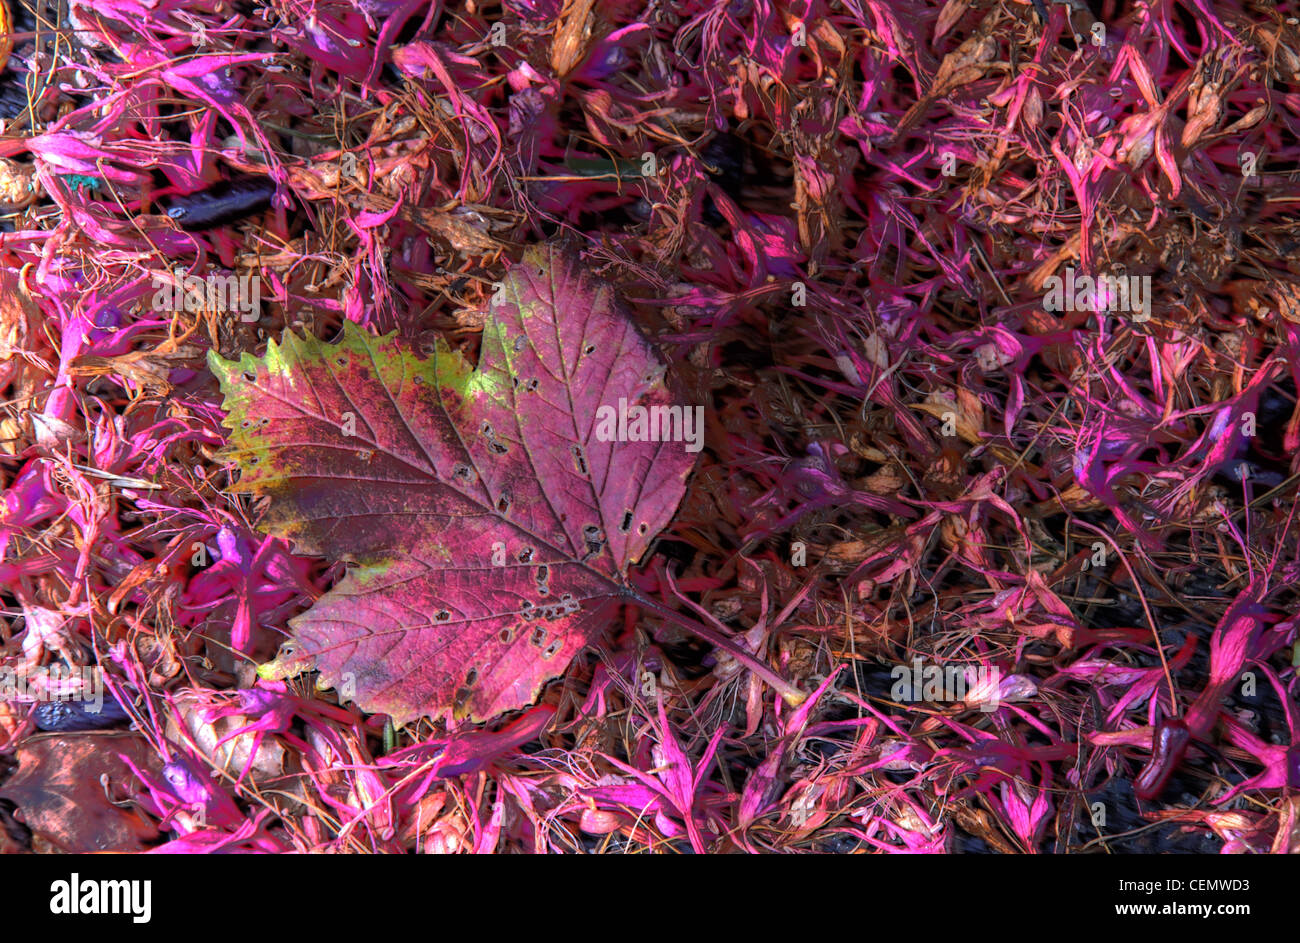 Autumn Red Pink Leaf on pink autumn fallen foliage, great reds and purples Stock Photo